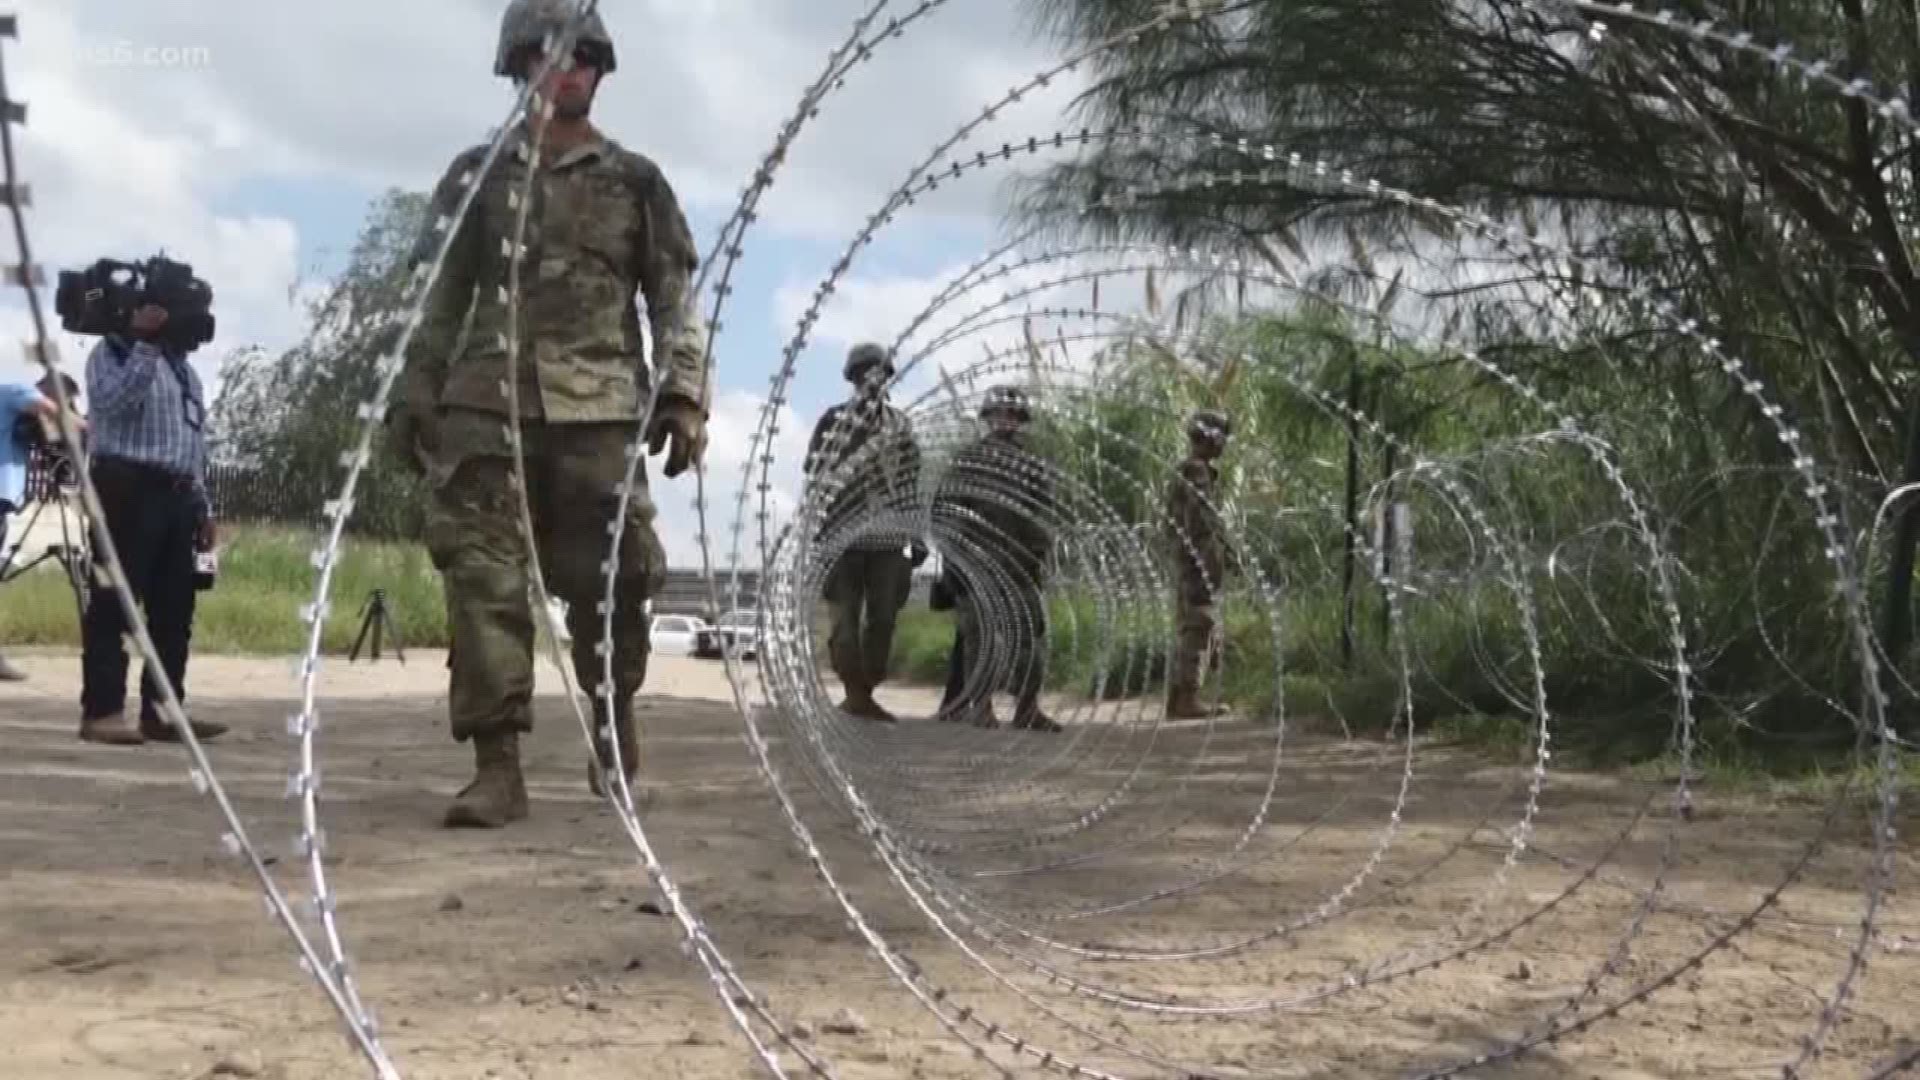 Despite the initial end date being scheduled for much earlier, 5,600 troops deployed at the U.S.-Mexico border are set to remain until the end of January, according to reports.